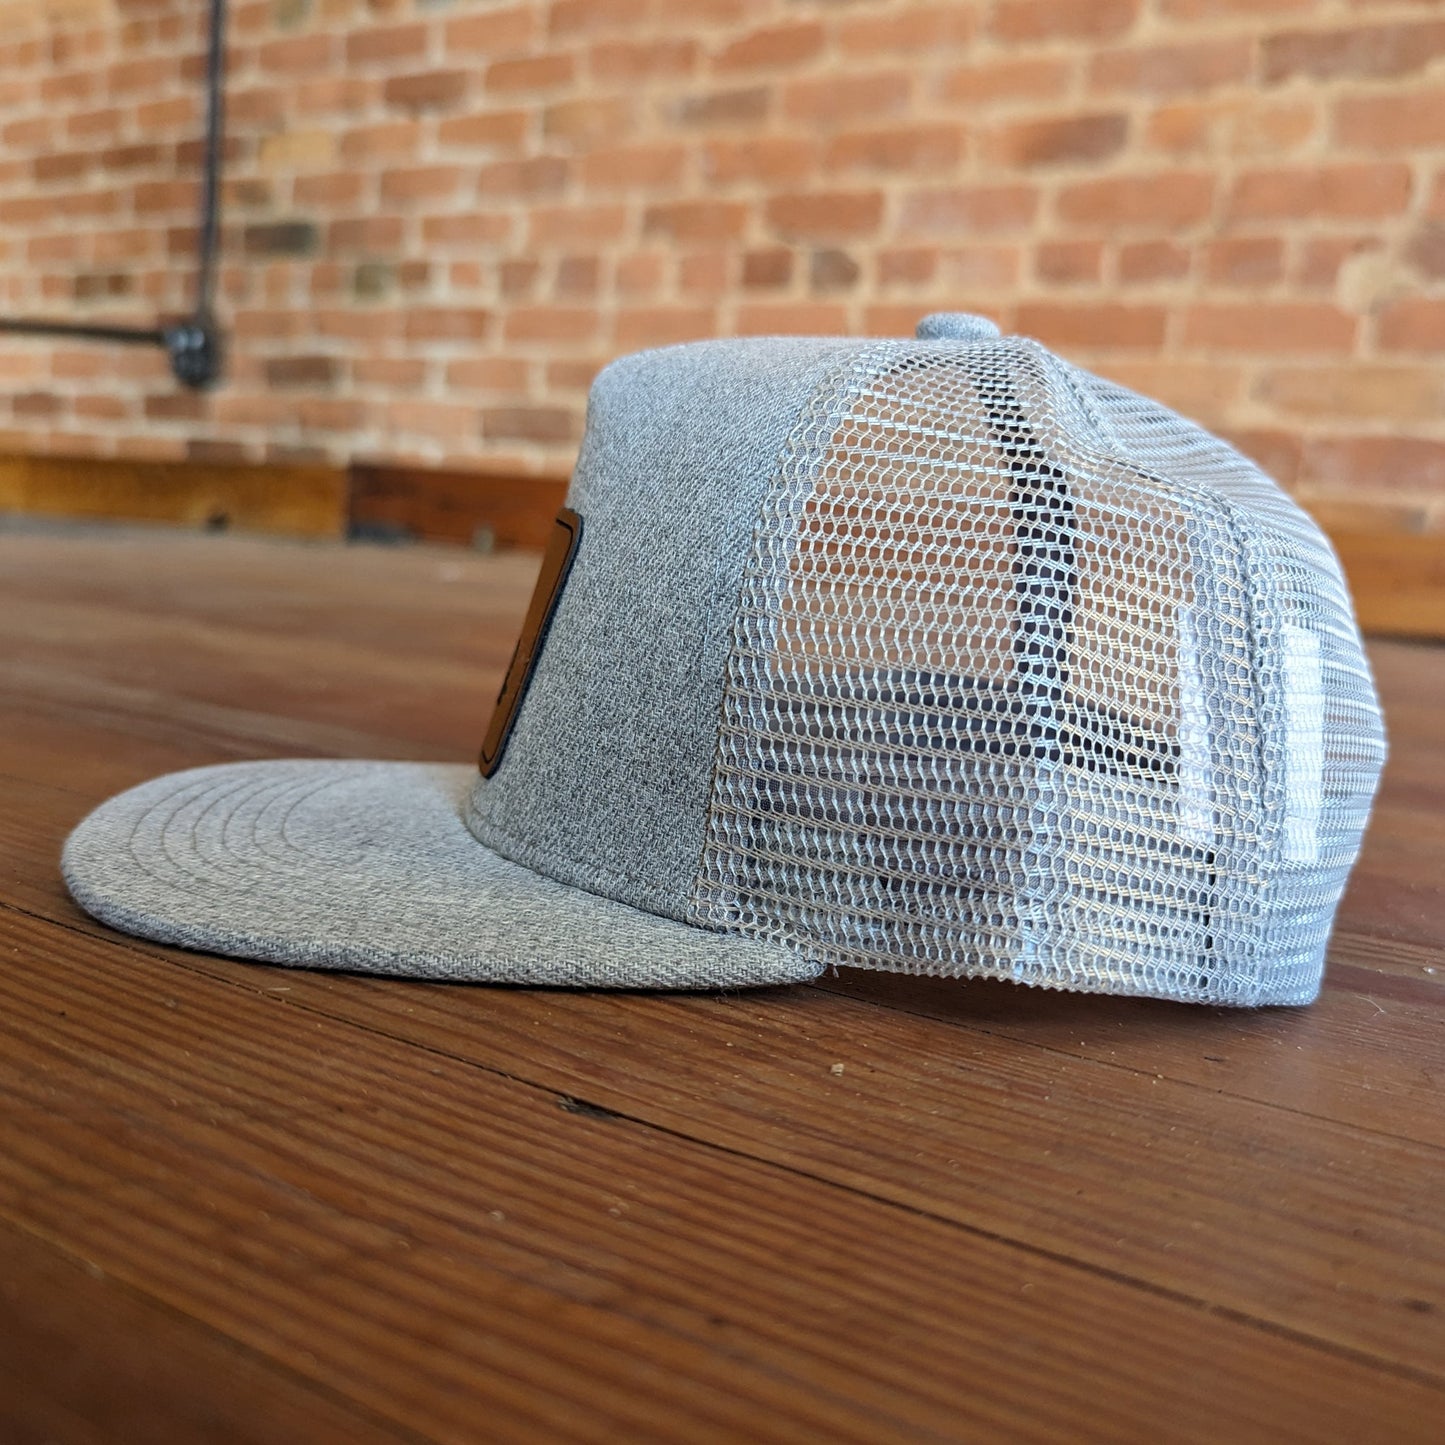 "Raised in a barn Cow" Mesh Back Trucker Hat | Youth Size | FOUR Color Options